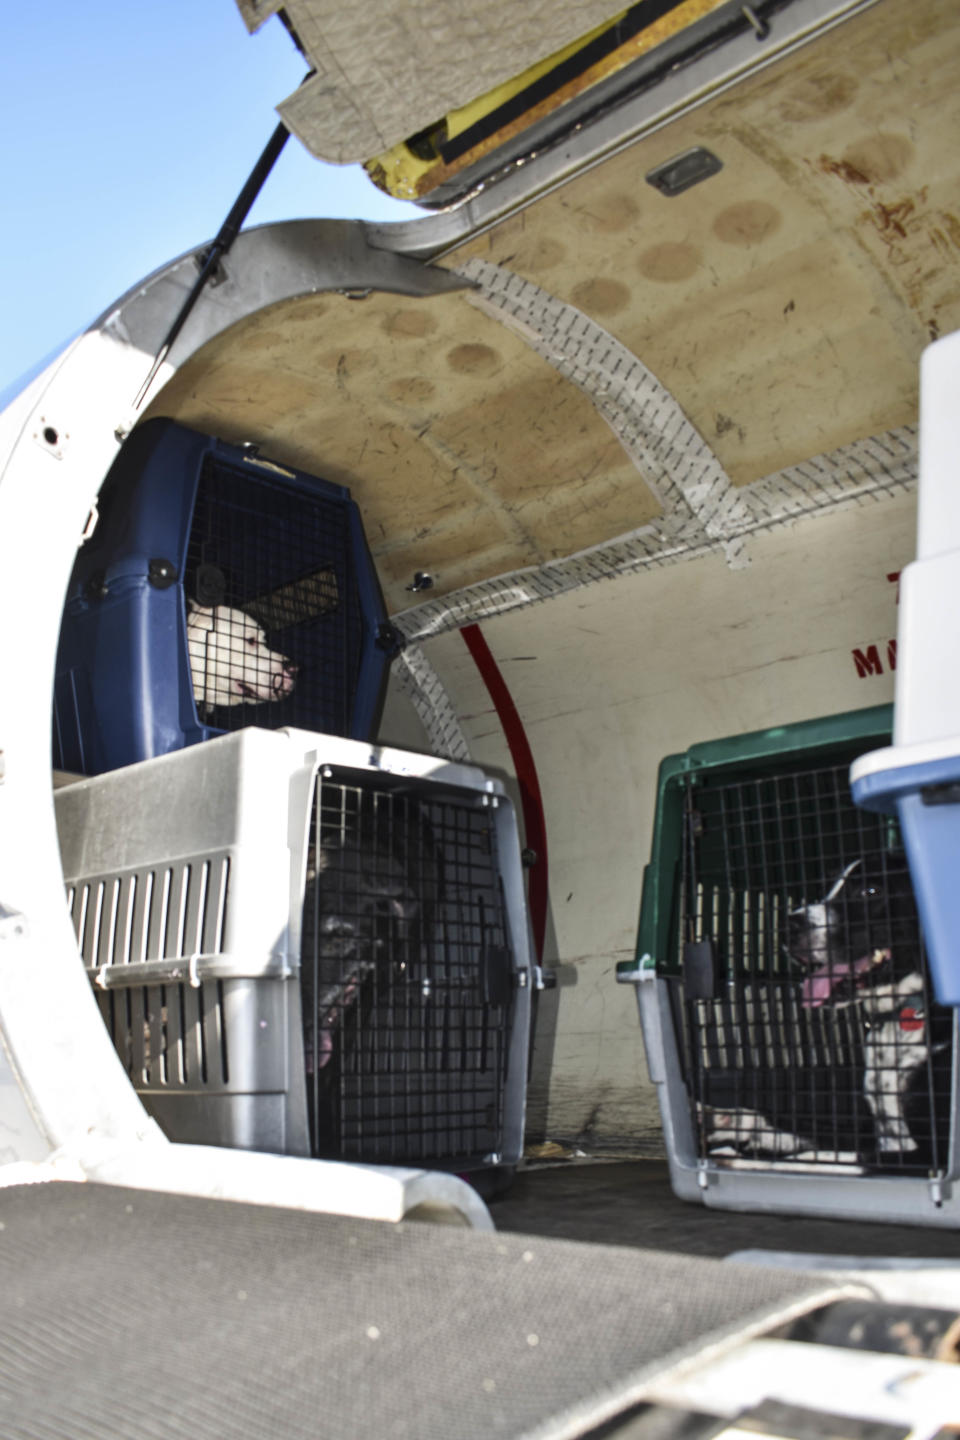 Dogs prepare to fly northeast after being evacuated out of South Florida shelters (Photo: HuffPost/Nina Golgowski)